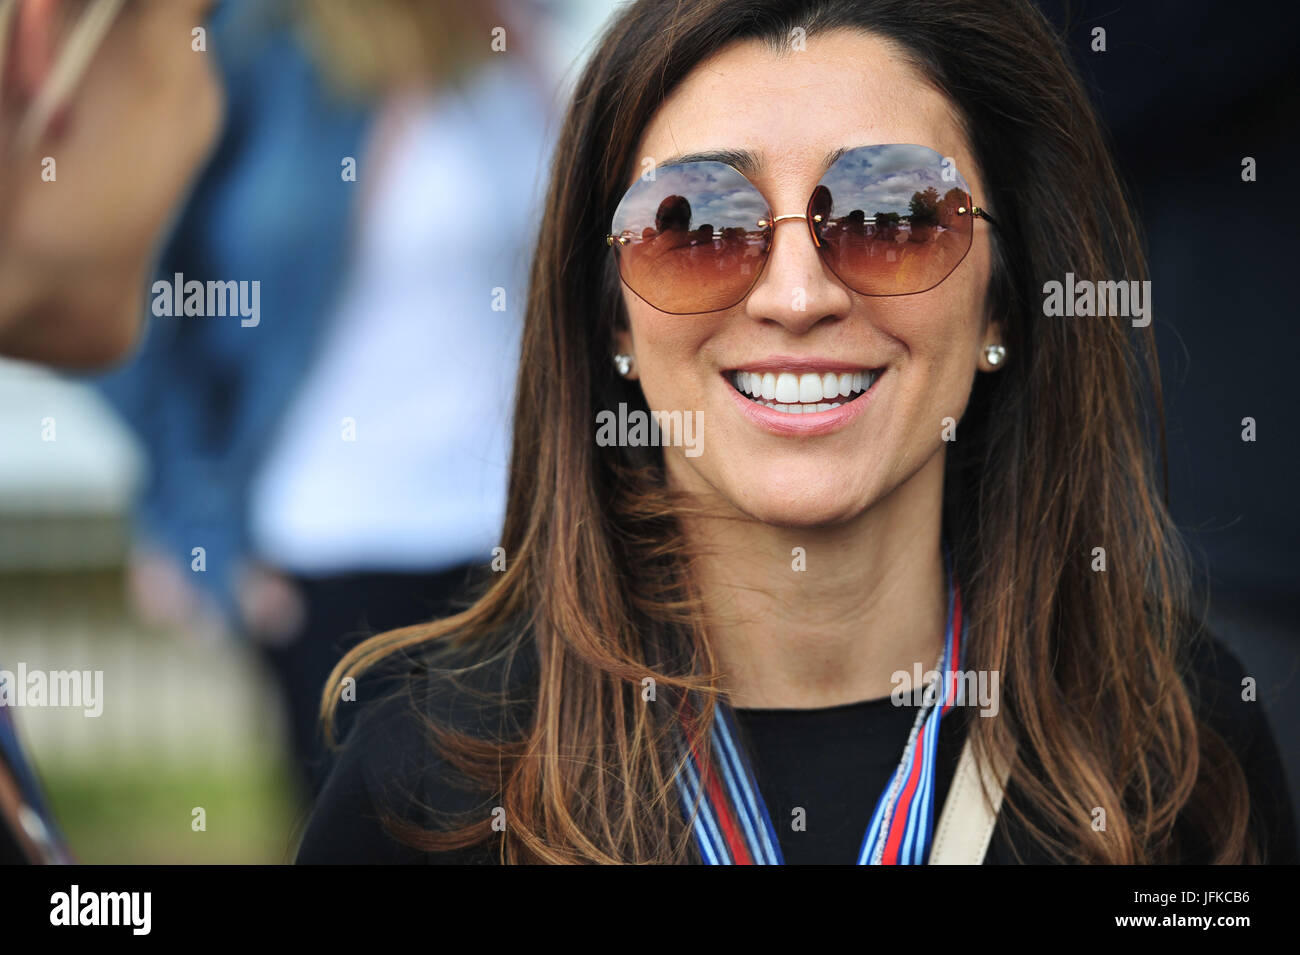 Goodwood, Chichester, UK. Saturday 1st July 2017. Fabiana Flosi, Bernie Ecclestone's wife, at the Goodwood Festival of Speed, Goodwood, West Sussex, UK. © Kevin Bennett/Alamy News Stock Photo